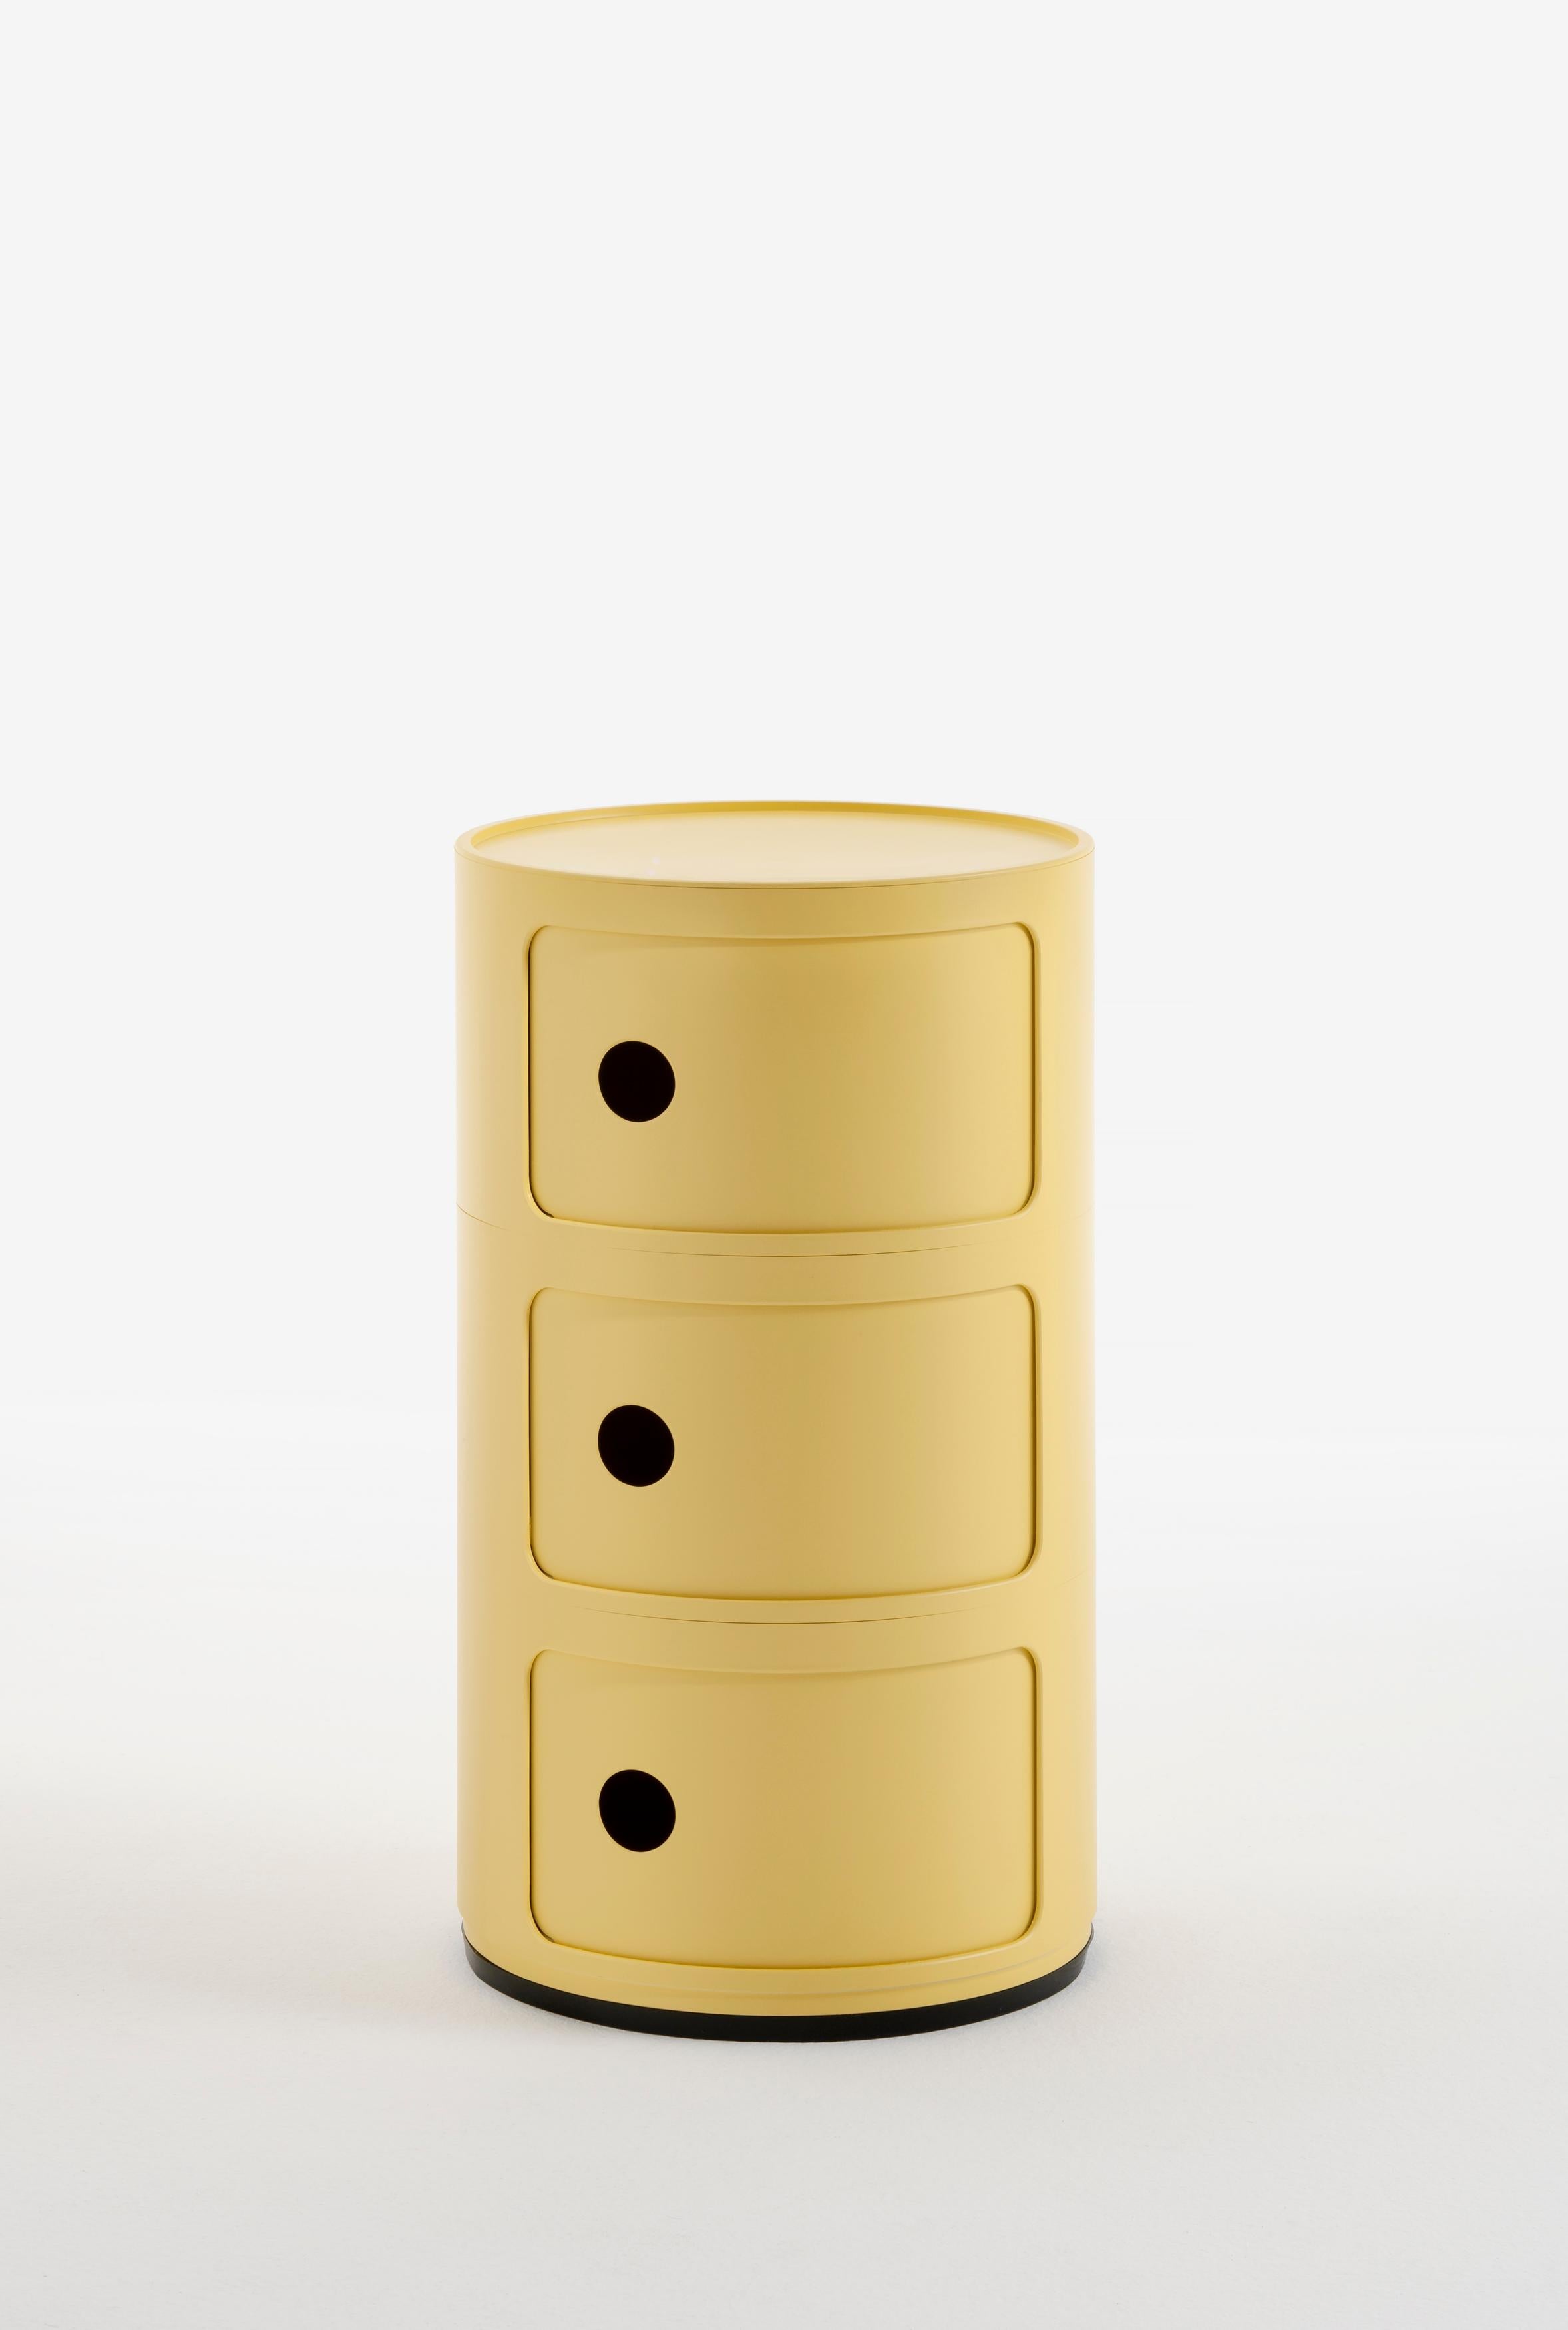 Componibili Bio in Yellow by Anna Castelli Ferrieri for Kartell. The Componibili Bio storage unit was first created by Italian designer and Kartell co-founder Anna Castelli Ferrieri in the 1960s. At the time of its origin, the Componibili Bio was